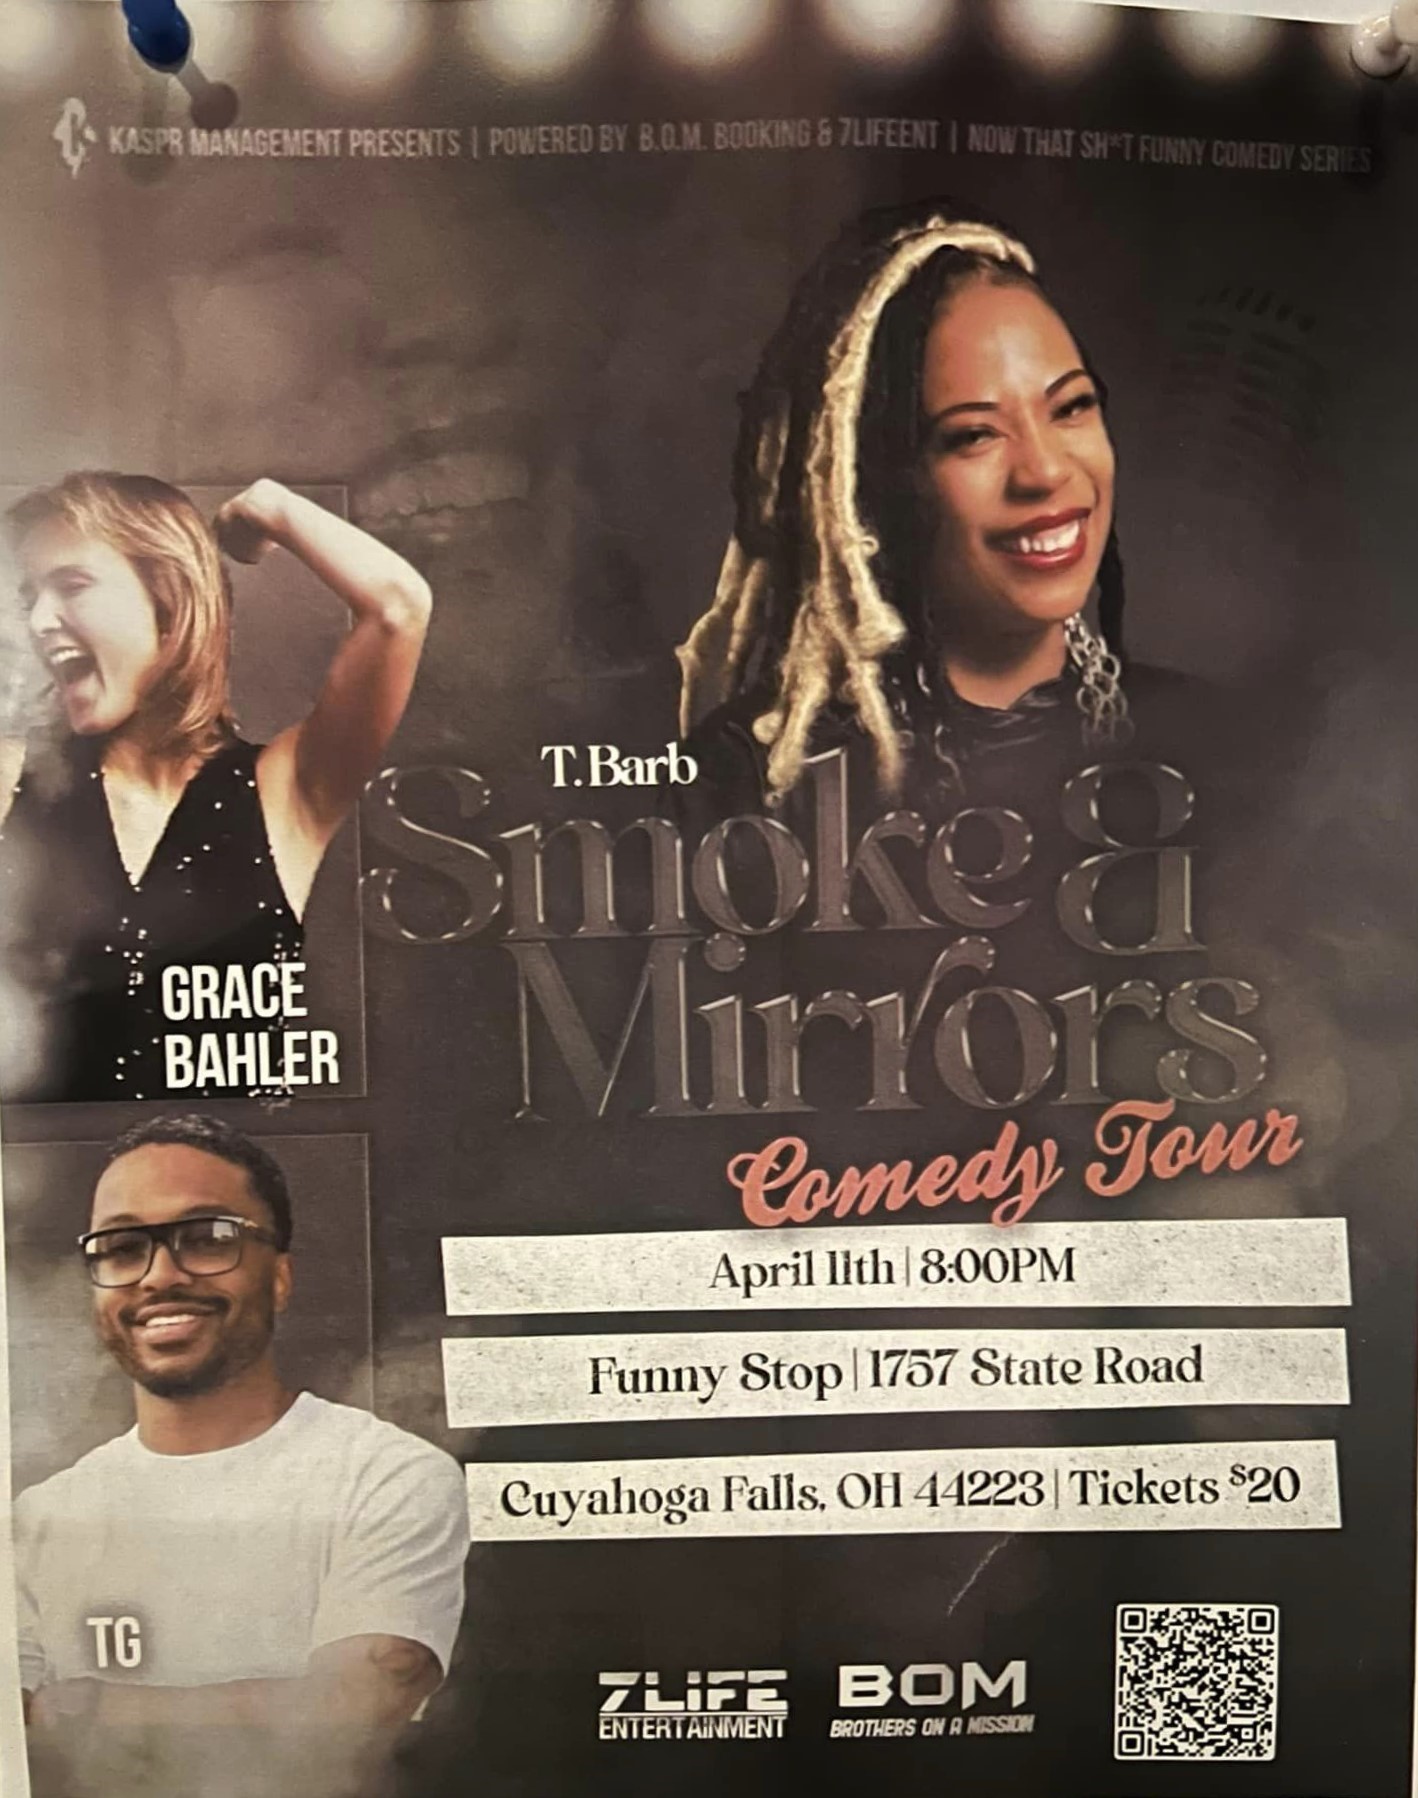 Smoke & Mirrors with T Barb and Friends Funny Stop Comedy Club on Apr 11, 20:00@Funny Stop Comedy Club - Buy tickets and Get information on Funny Stop funnystop.online